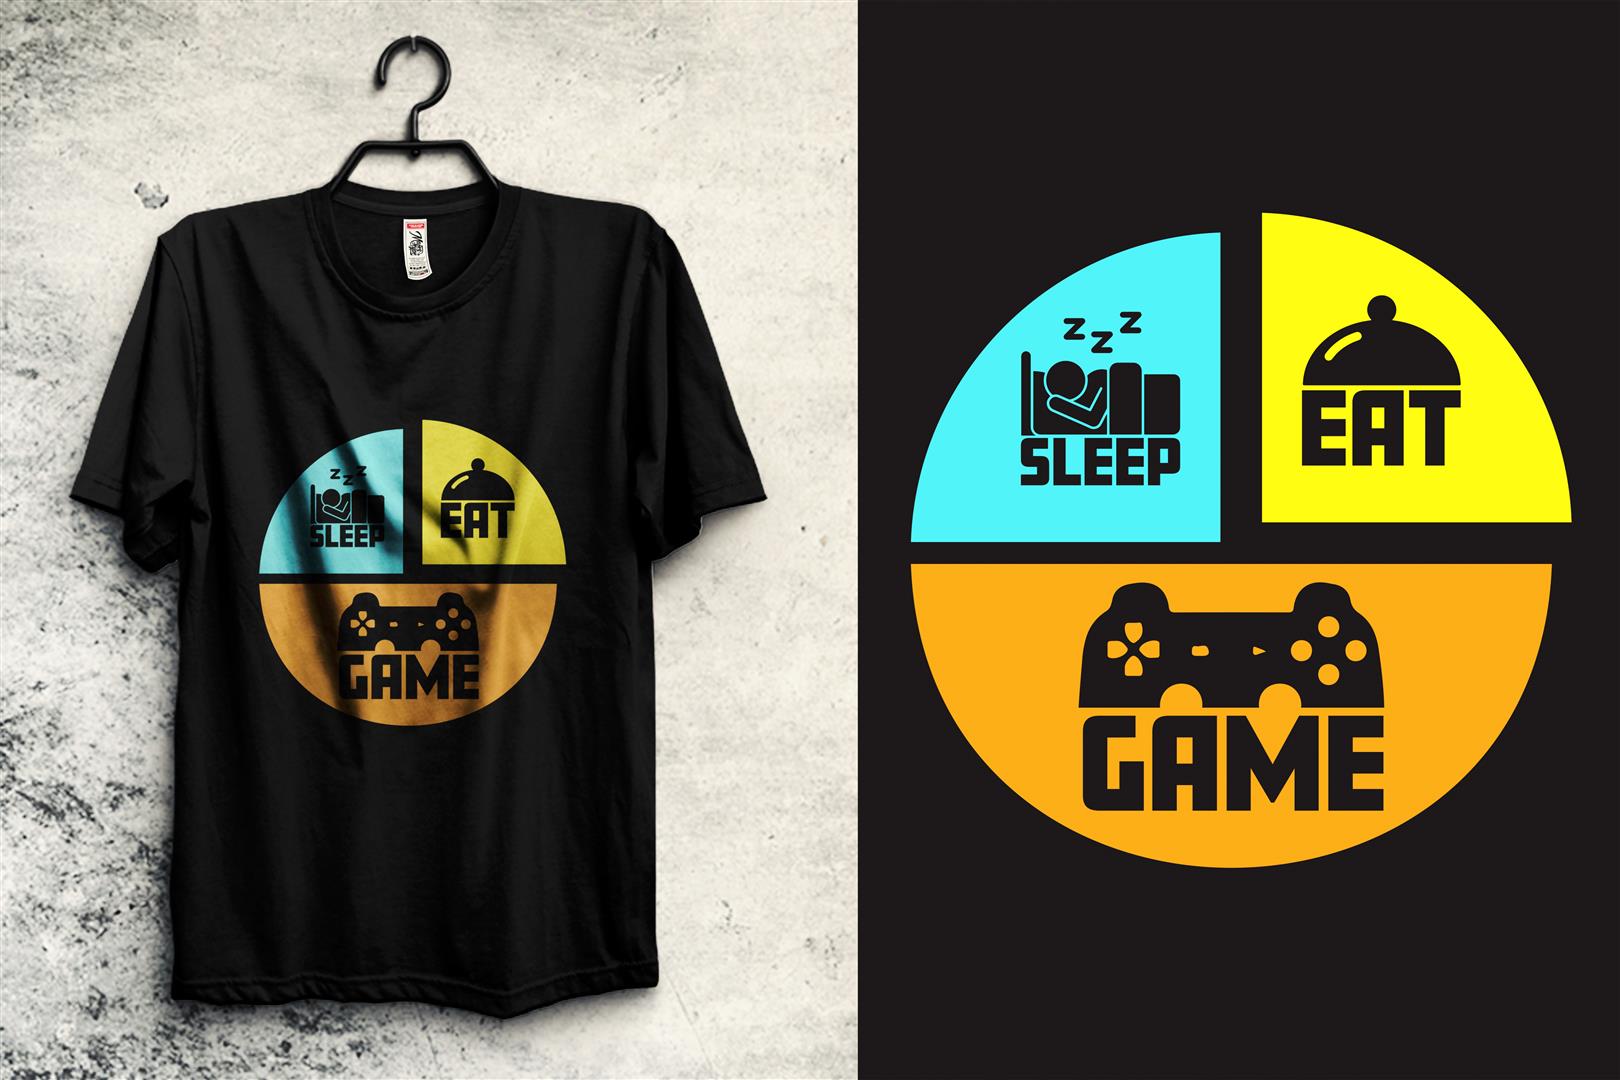 T - shirt with a video game logo on it.